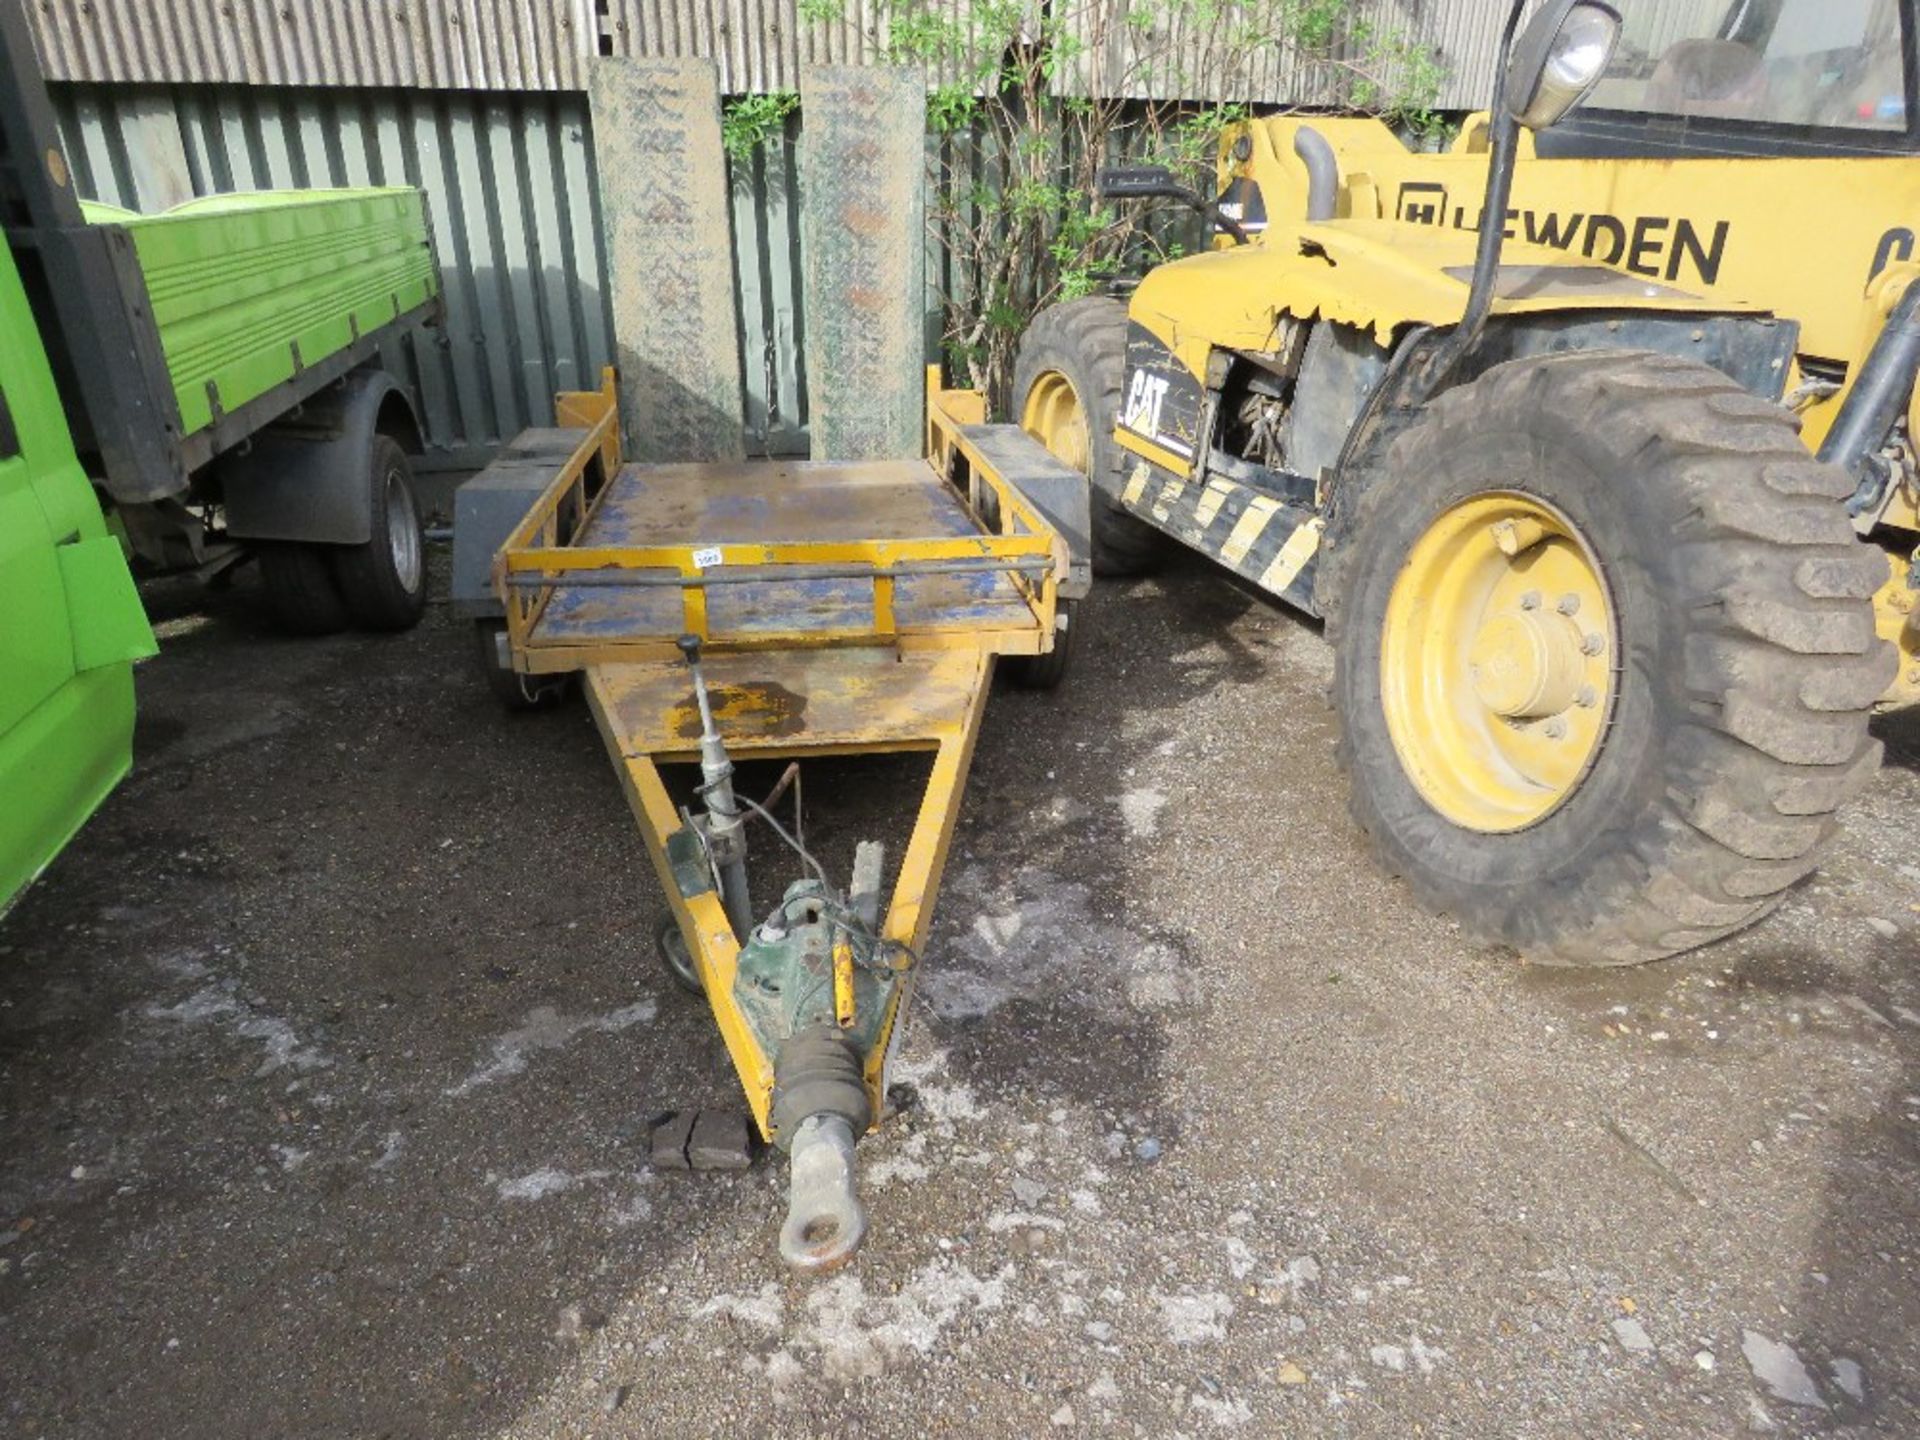 INDESPENSION TYPE MINI DIGGER TRAILER, 8FT X 4FT BED APPROX WITH REAR RAMPS. BALL HITCH. DIRECT FROM - Image 5 of 5